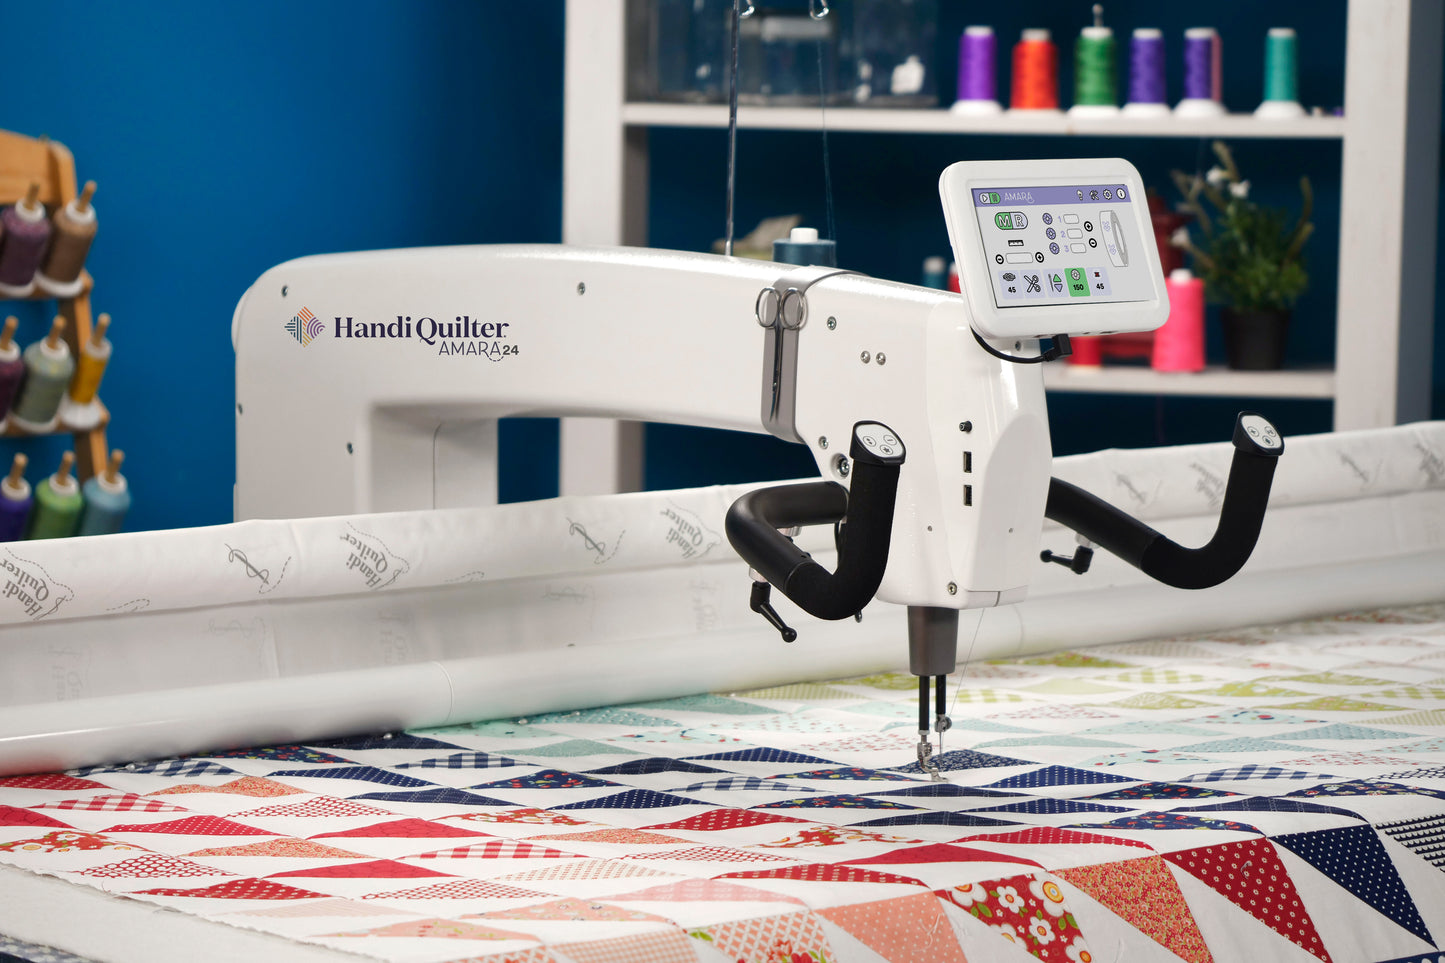 3 Day Handi Quilter Hands-On Event